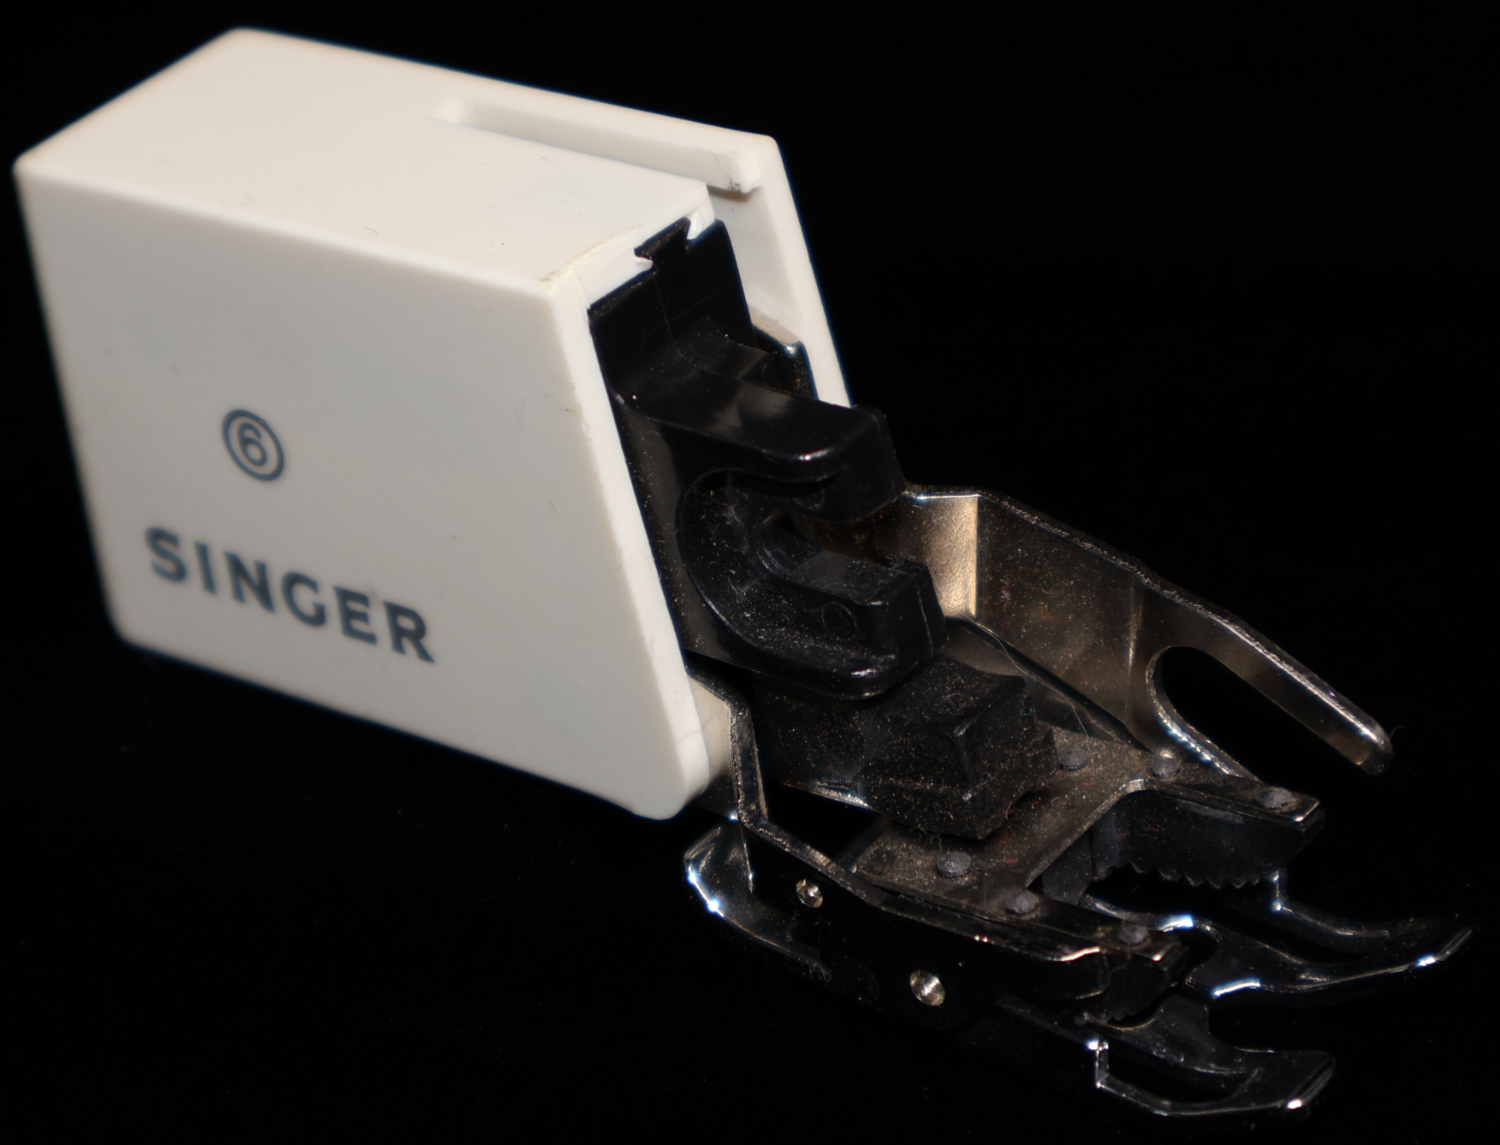 Walking foot Attachment for a singer sewing machine.